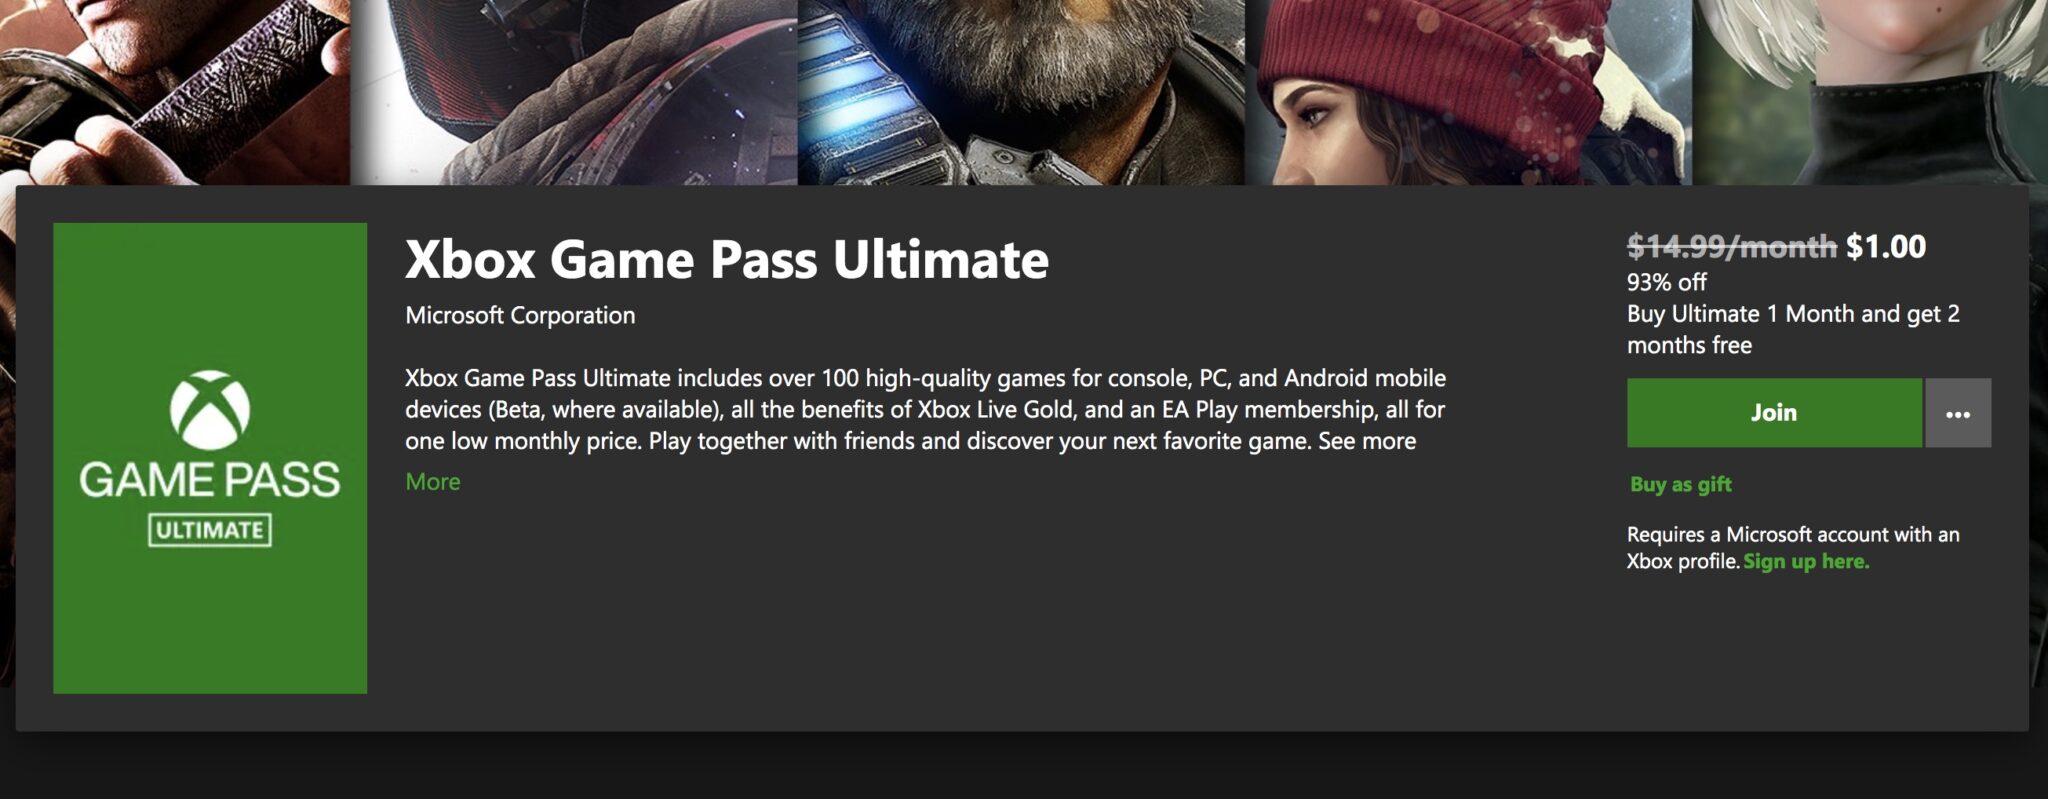 best games on xbox ultimate game pass